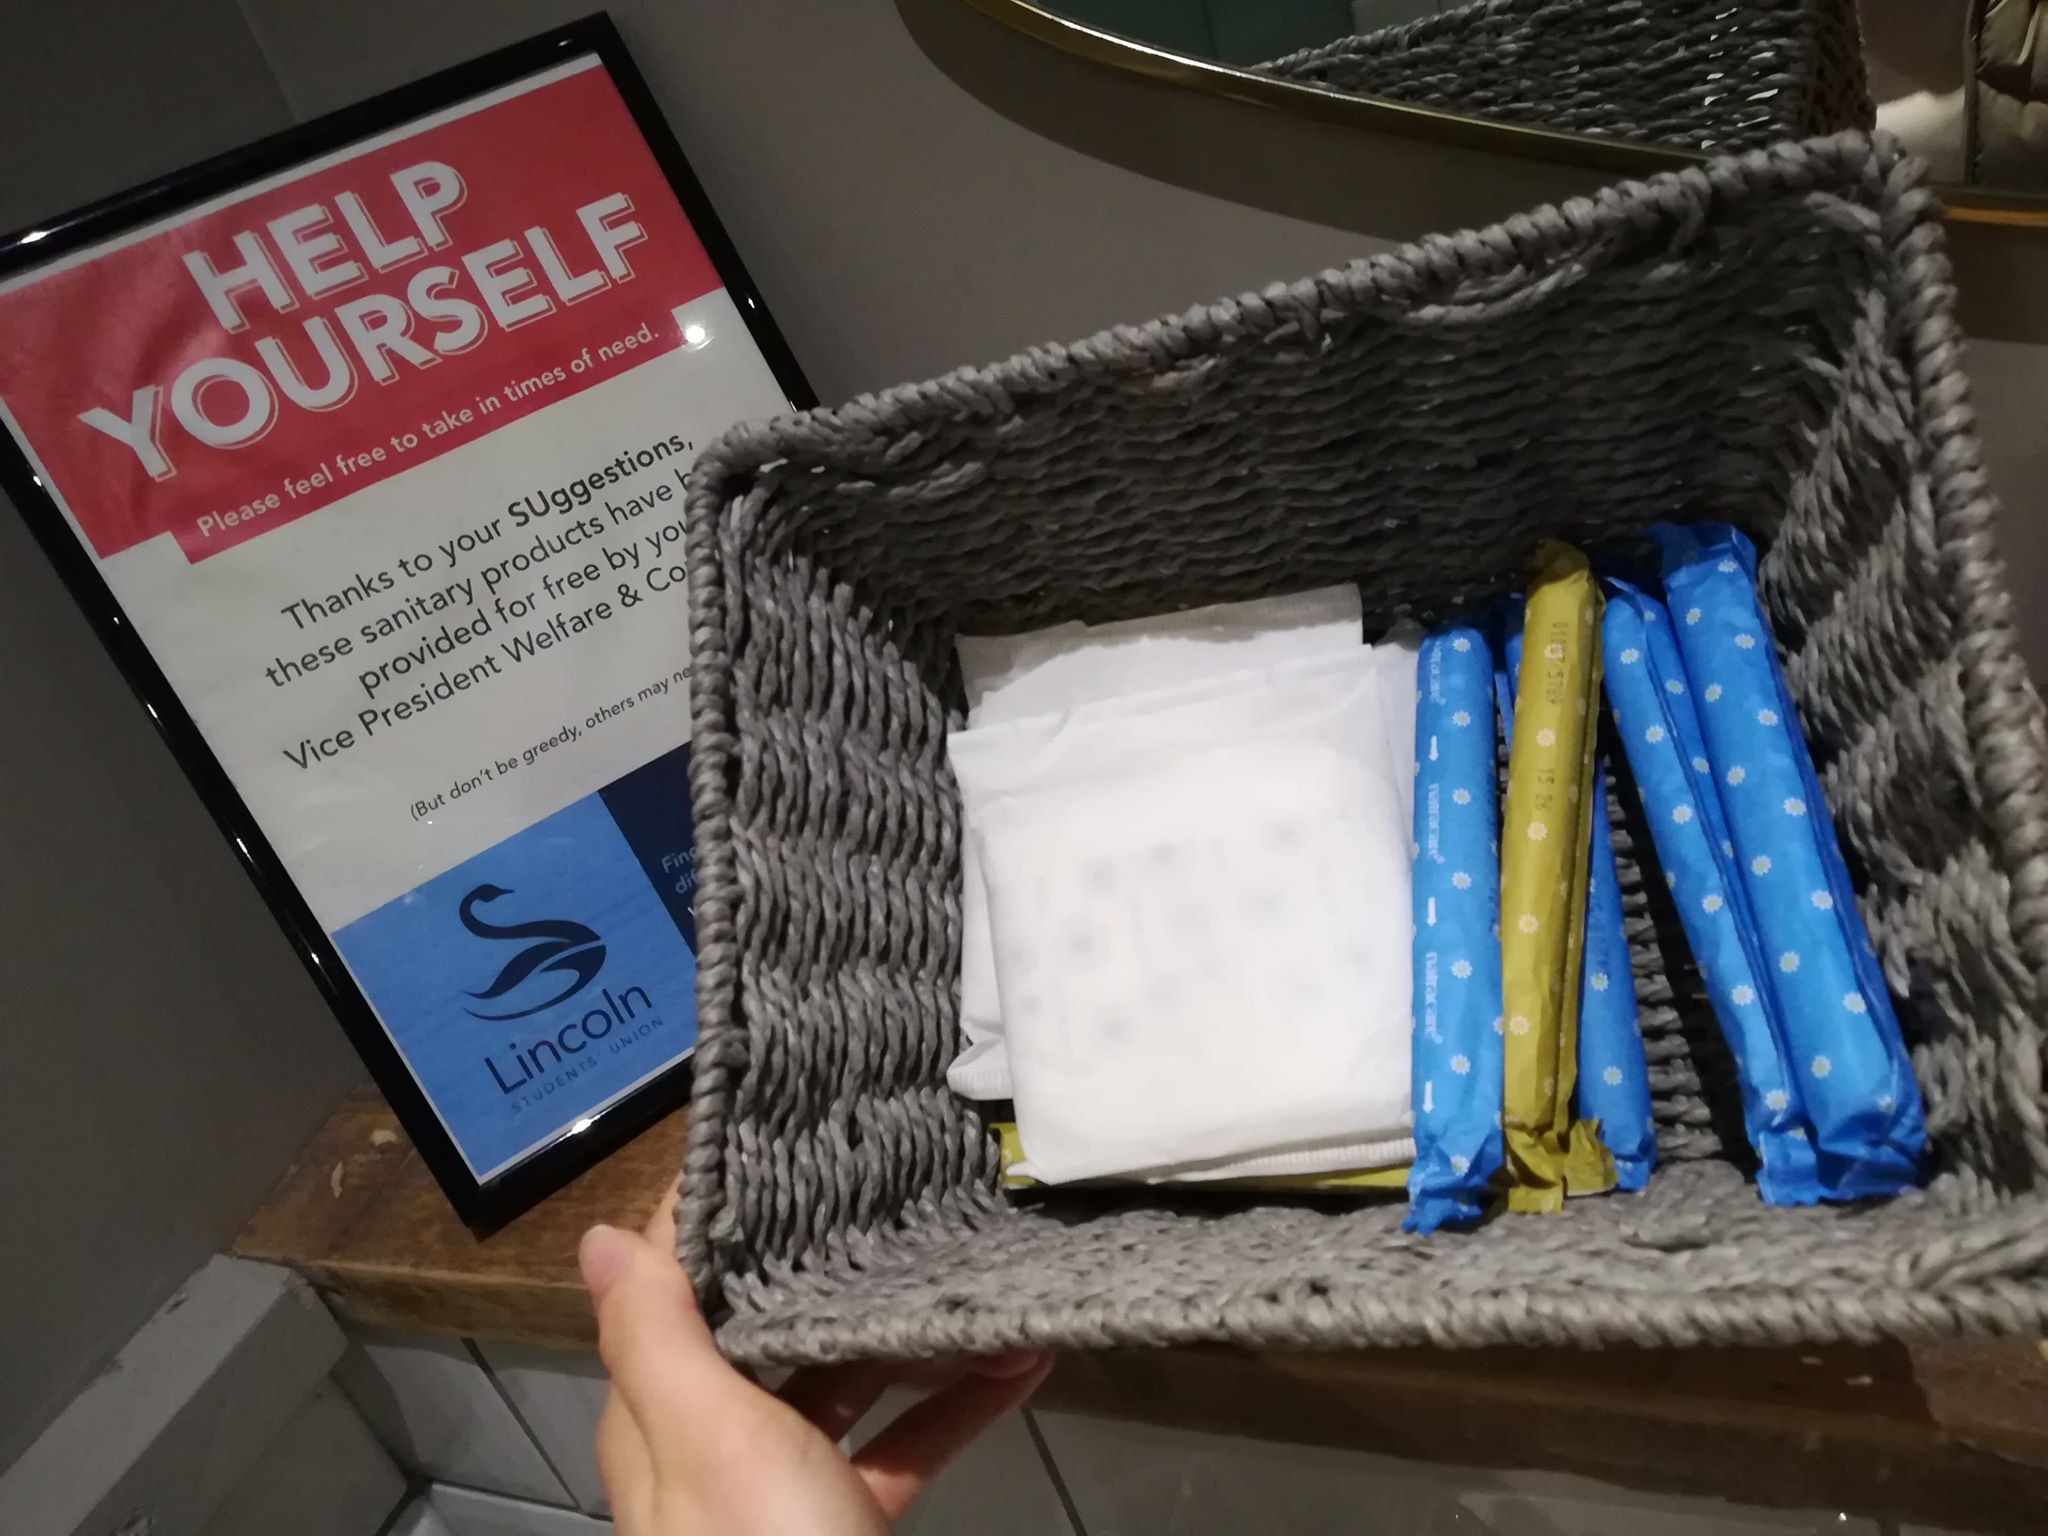 Sanitary Products provided to university students at the University of Lincoln